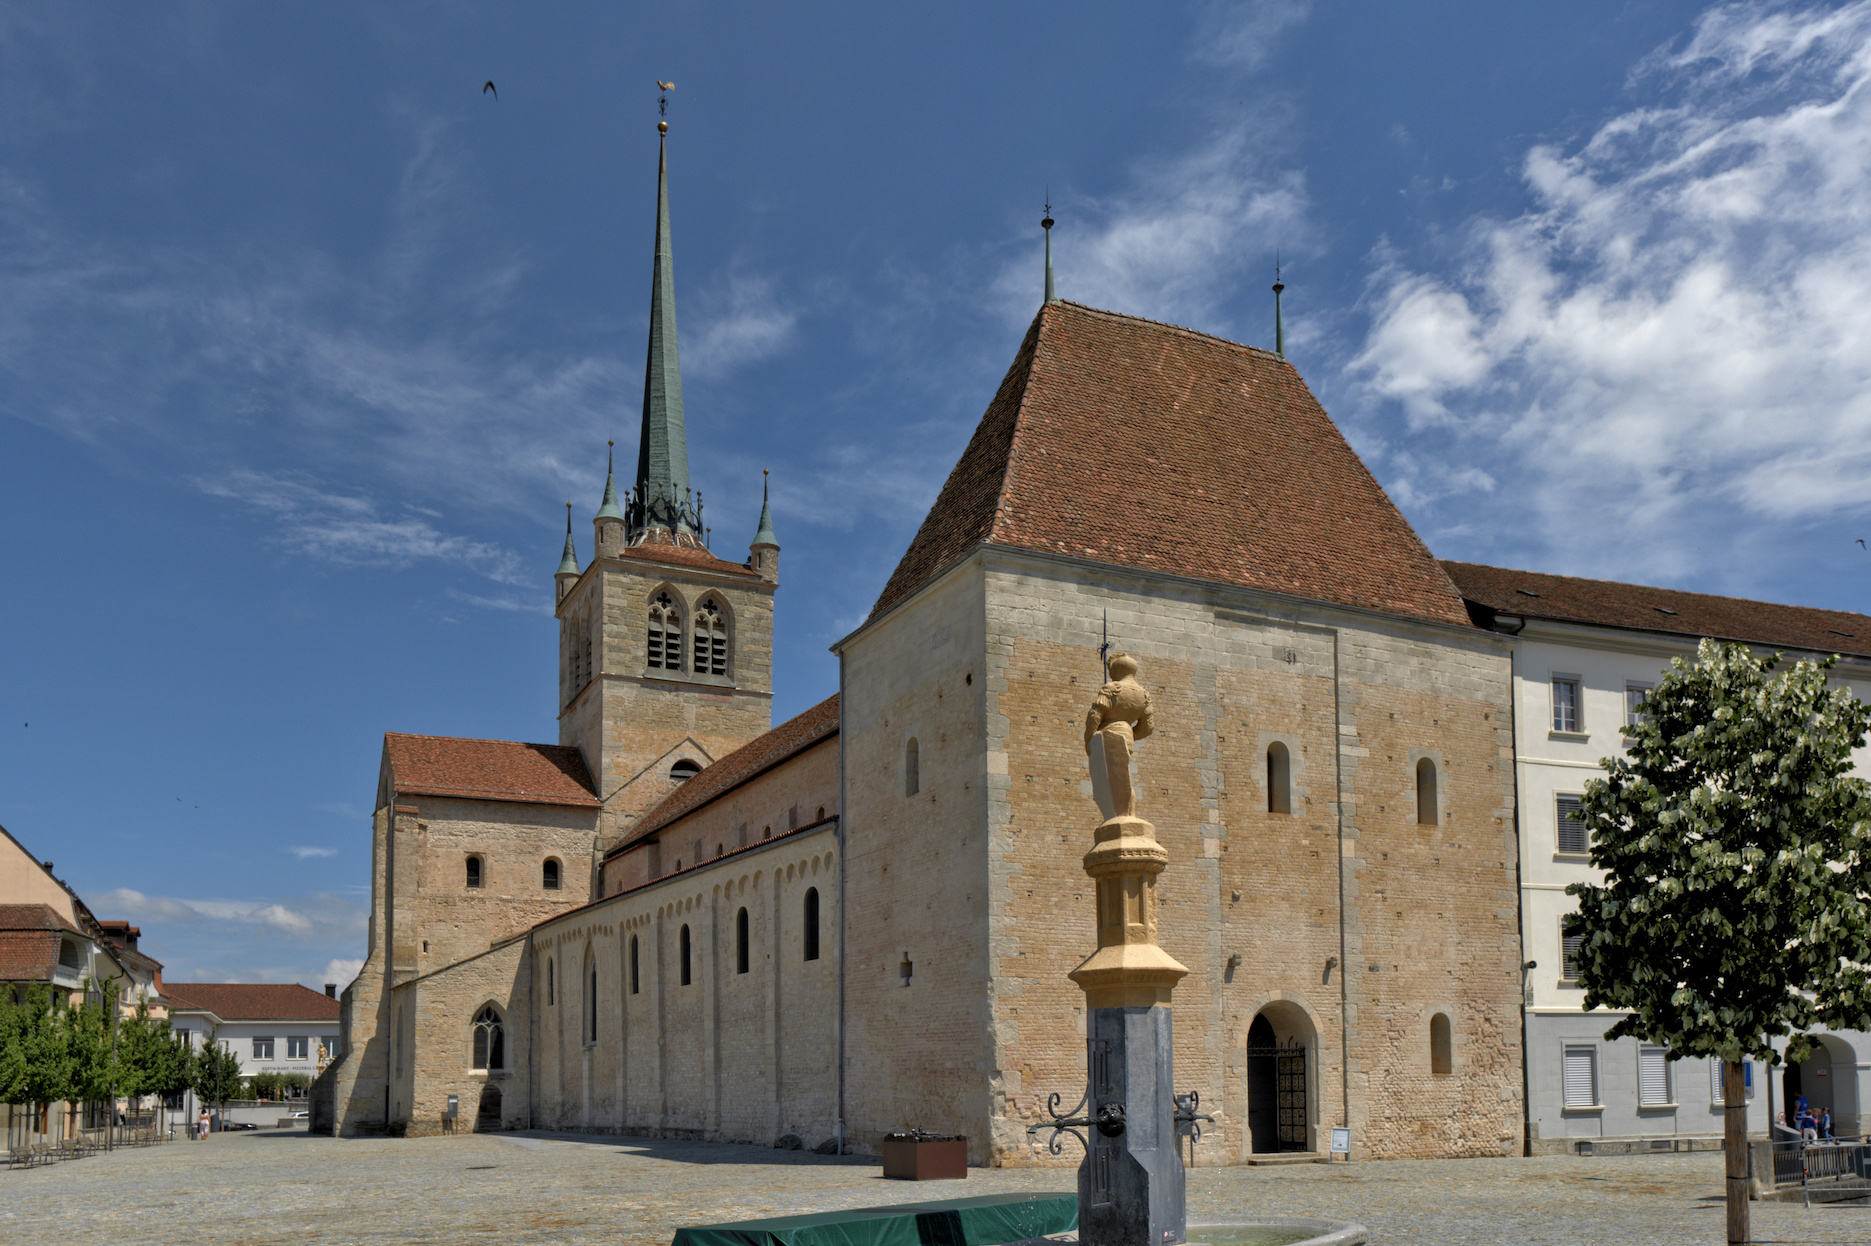 View of the choir of Old protestant abbey church in Payerne, Switzerland